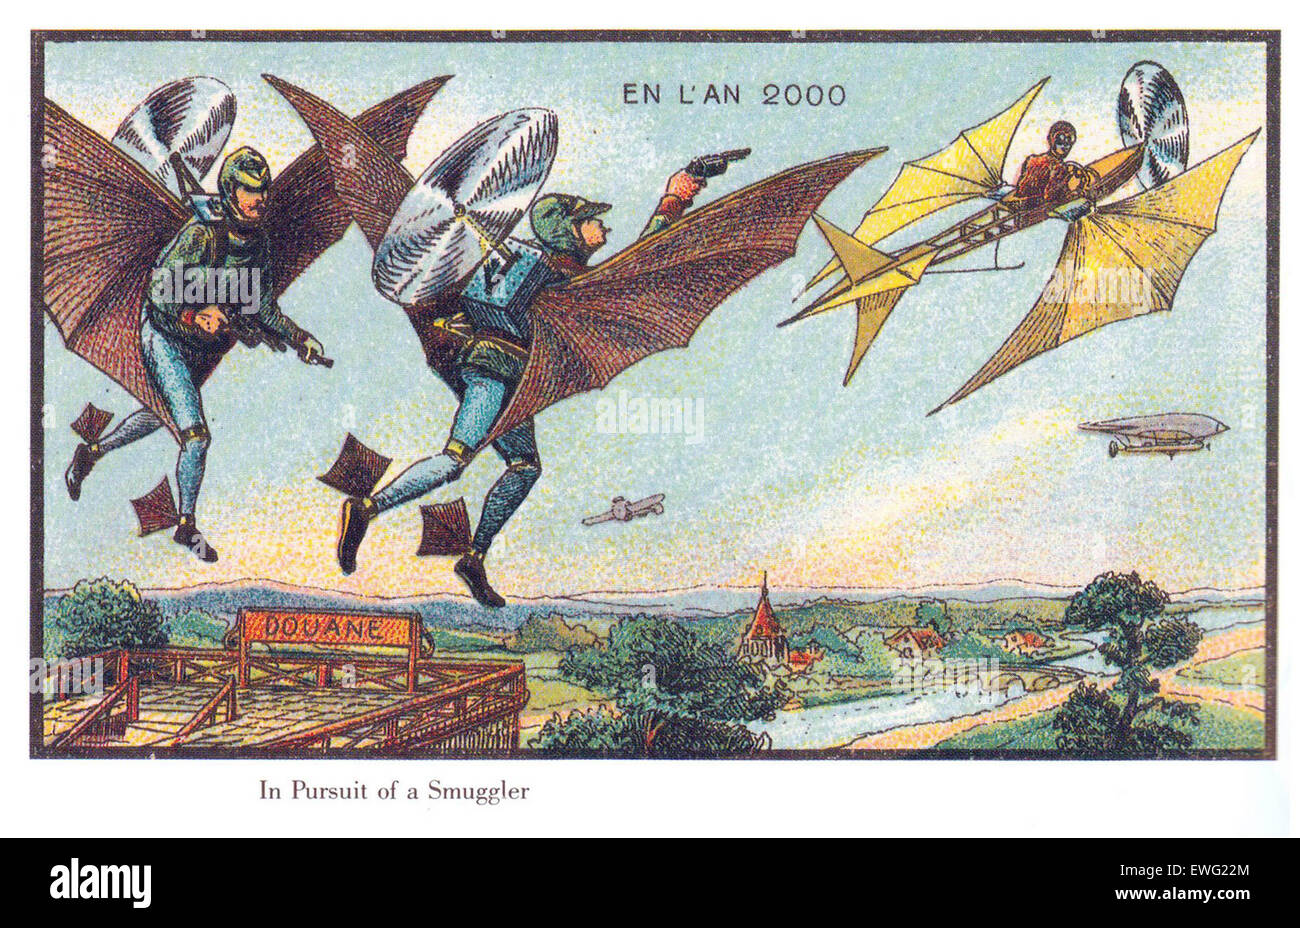 Vintage Futuristic Illustrations of France in the Year 2000 Stock Photo